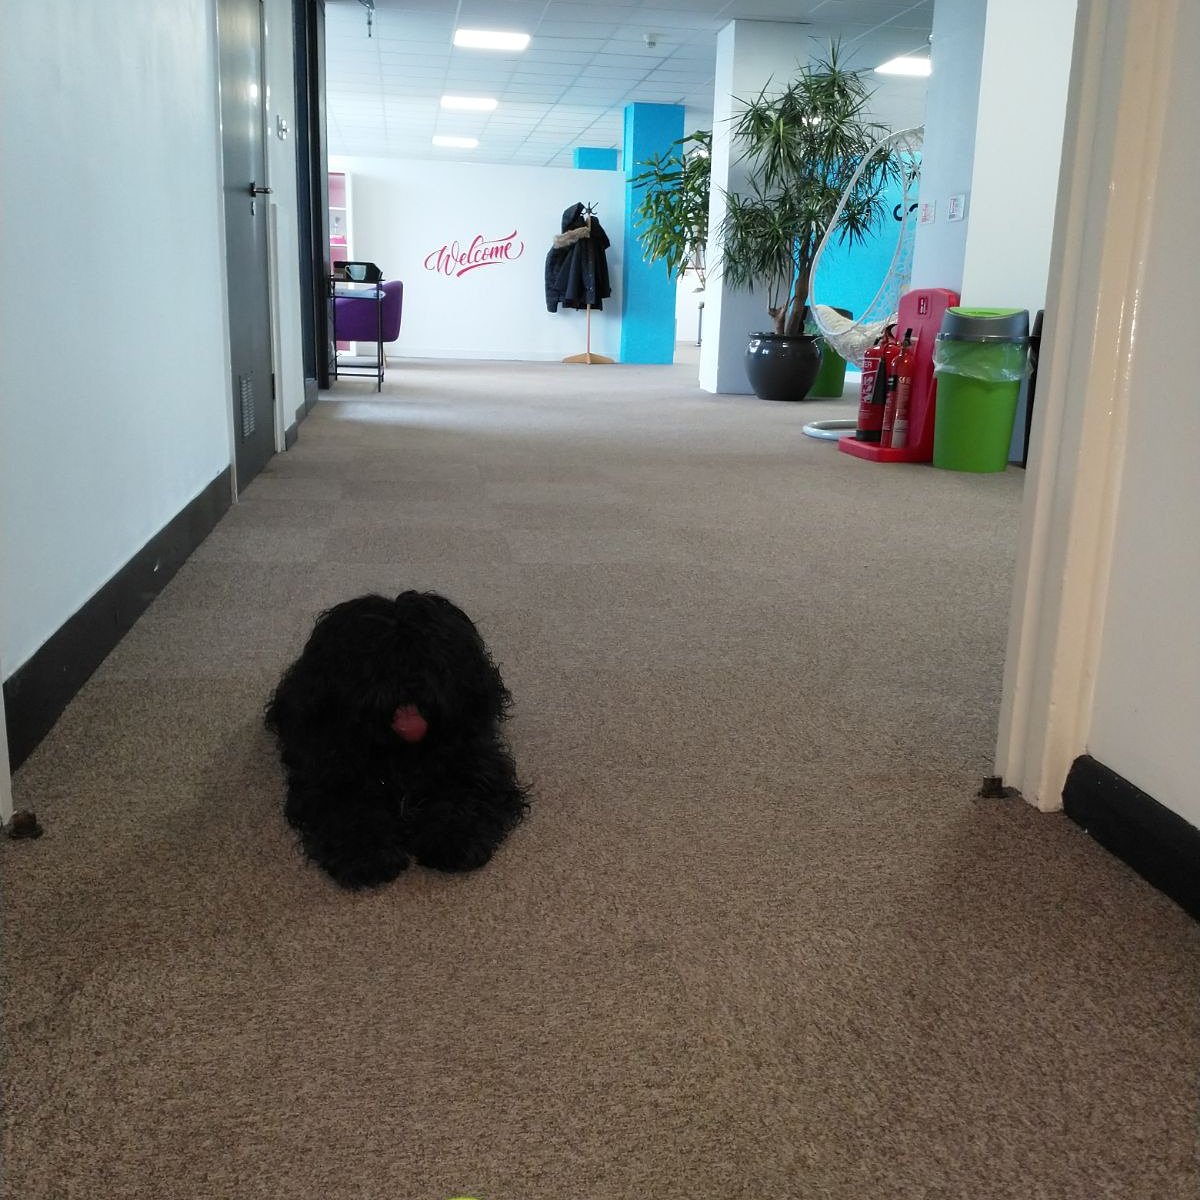 Resident office dog Apple with here to chillax with you when you need a break. 
coworkhub.co
#Applethedog #doggiefriendly #officedog #cutedog #nottinghill #cooloffice #londoncoworking #LondonIsOpen #coworkhub